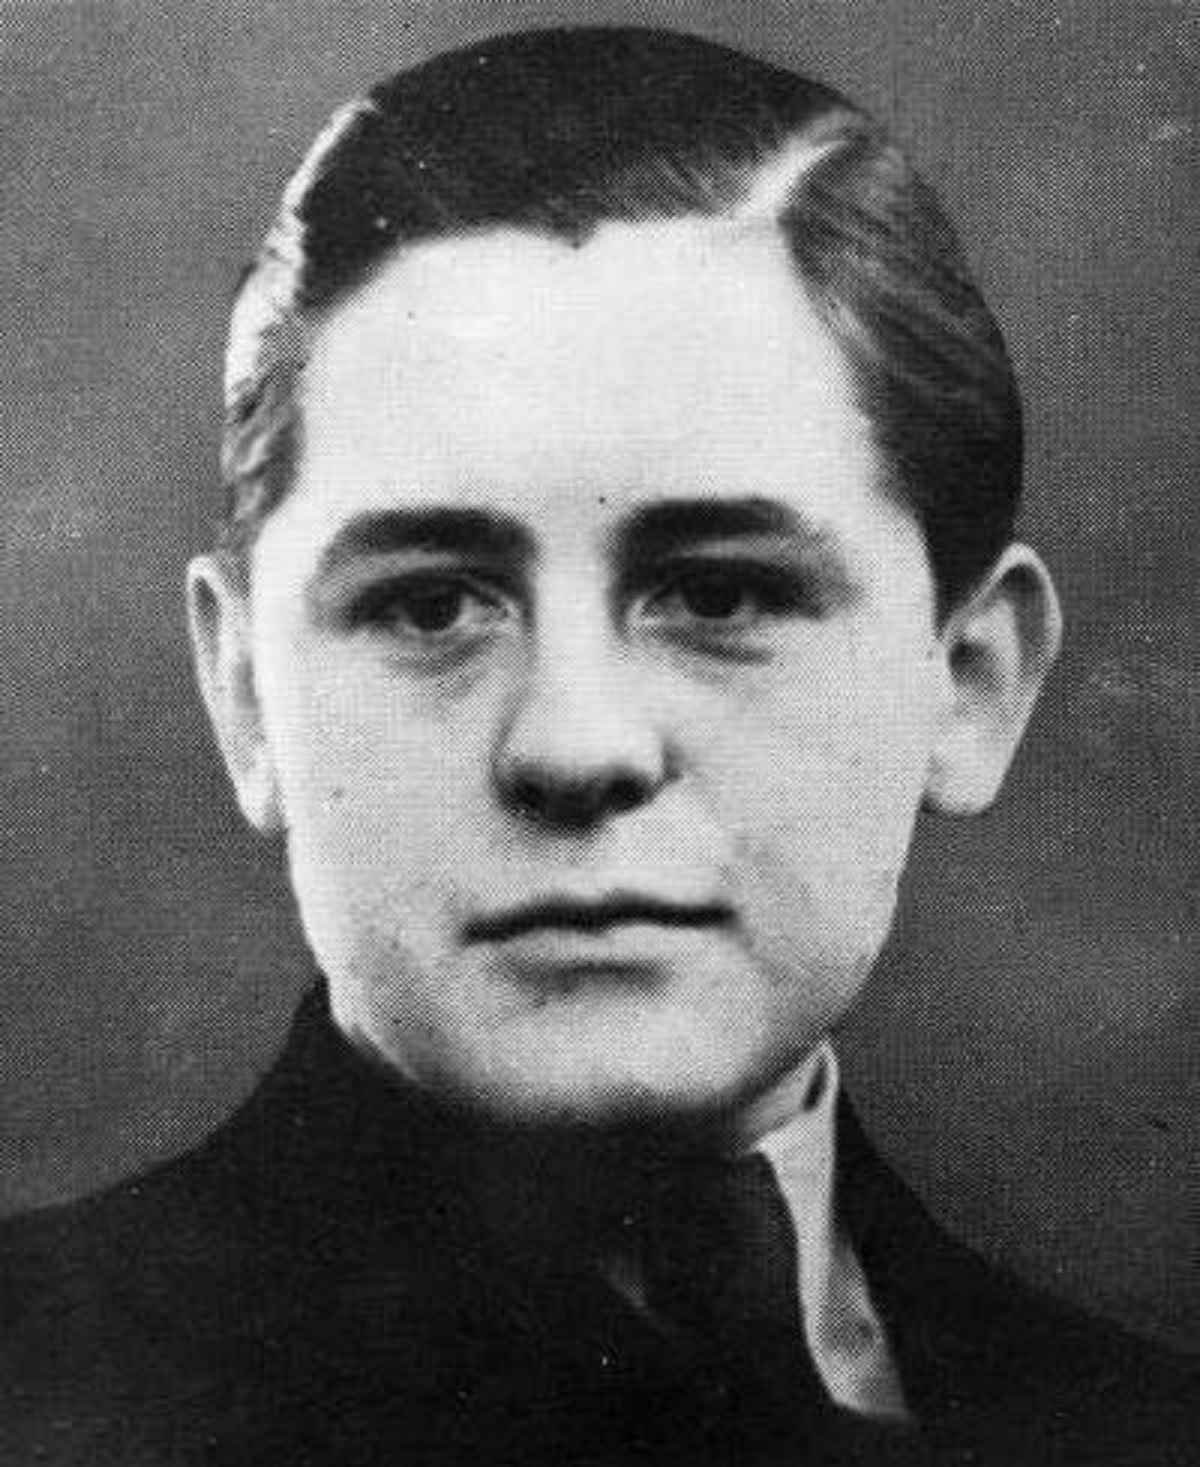 Helmuth Hübener was a teenage boy living in Nazi Germany. He distributed anti-nazi leaflets and tried to tell people in Germany the war was not going the way Hitler and the party claimed it was. He was arrested alongside several other boys who had helped him. During his trial, Helmuth purposefully baited the judges so that his friends would receive lighter sentences. His friends were sentenced to imprisonment in labor camps, 
<br/><br/>
Helmuth was sentenced to death by beheading. After his conviction, he turned to the judges and said "I have to die now for no crime at all. Your turn is next!" He was executed in 1942 at the age of 17.